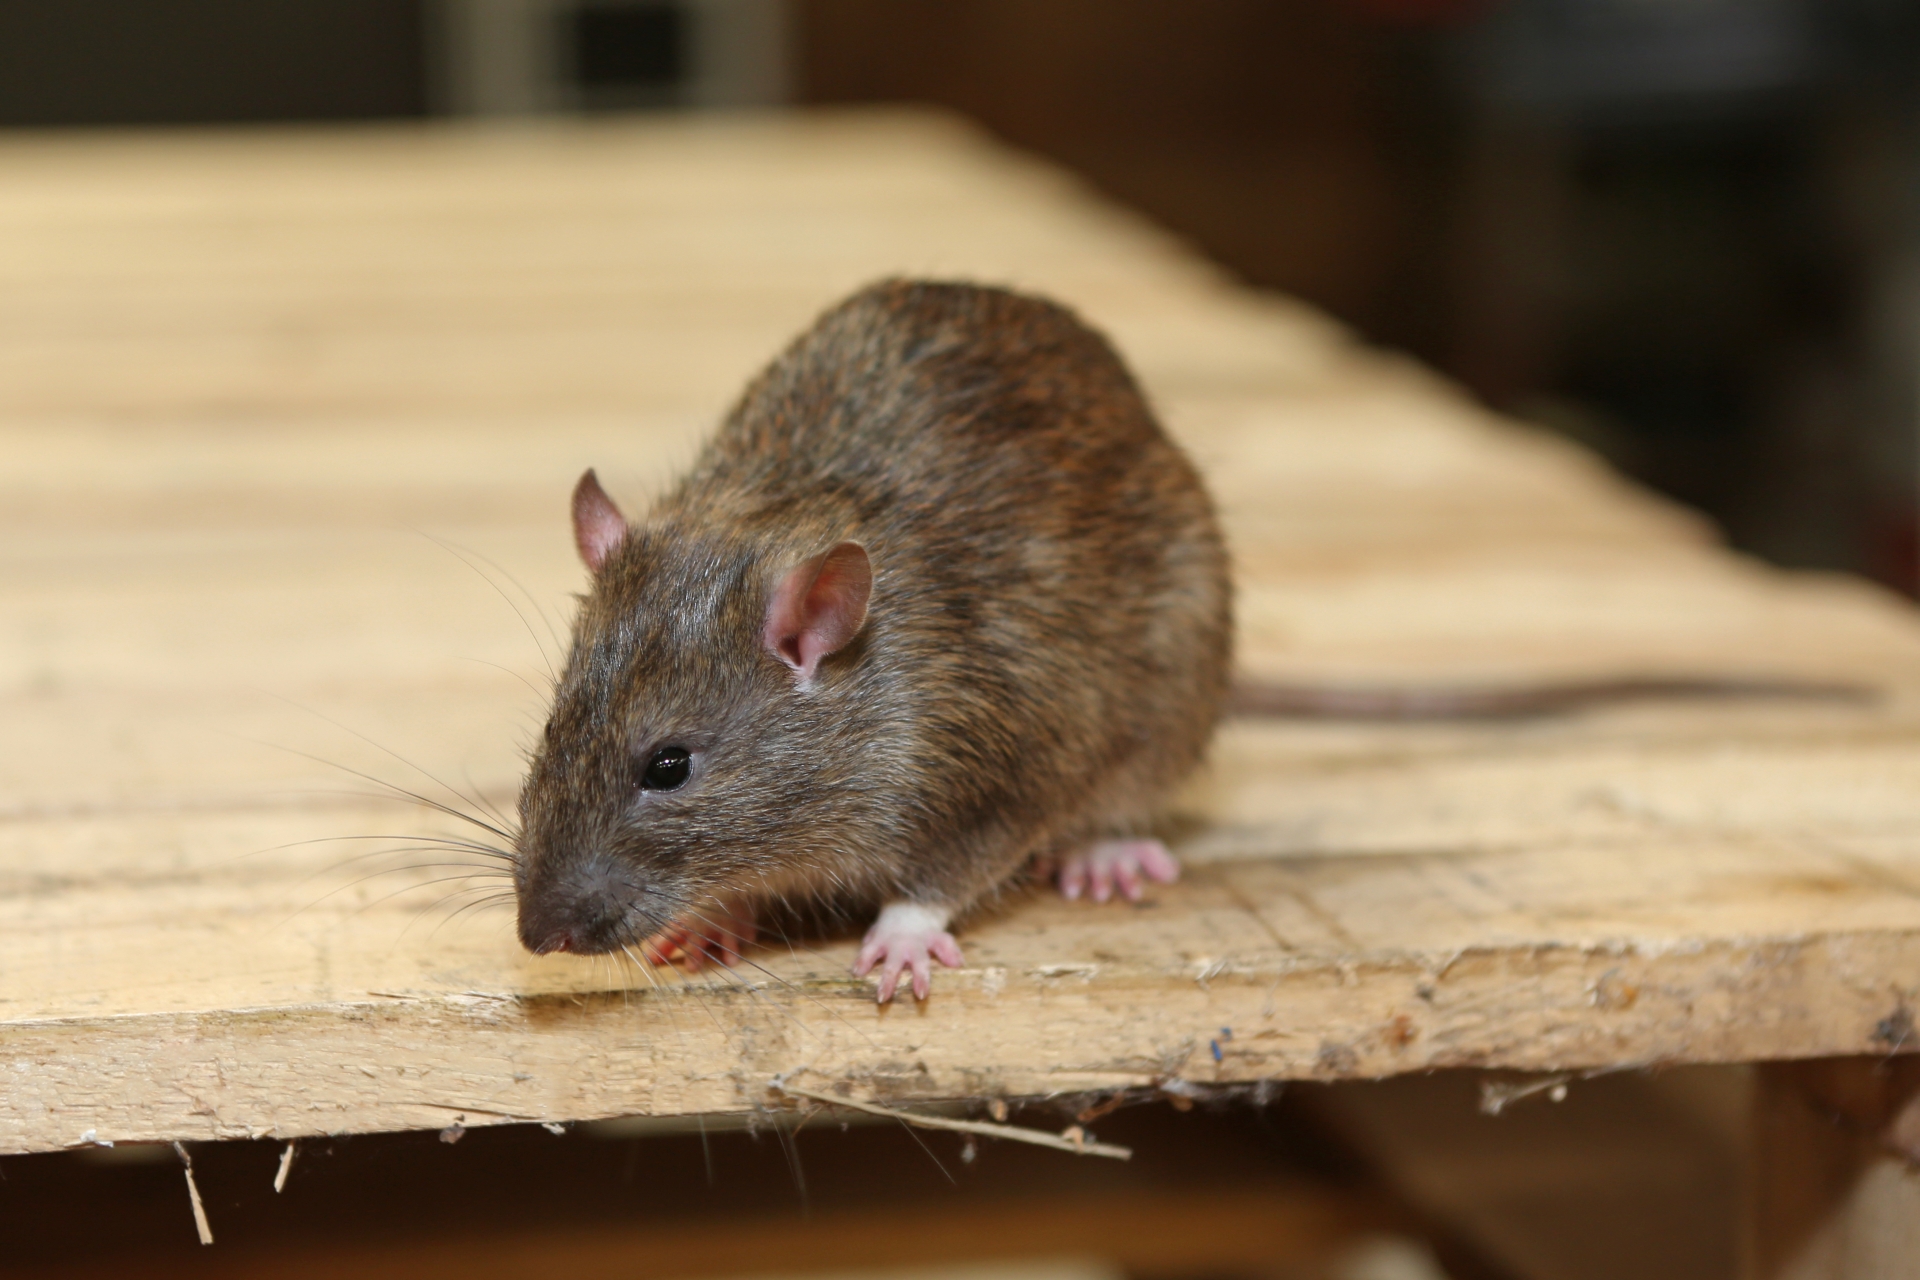 Rat Control, Pest Control in North Feltham, East Bedfont, TW14. Call Now 020 8166 9746